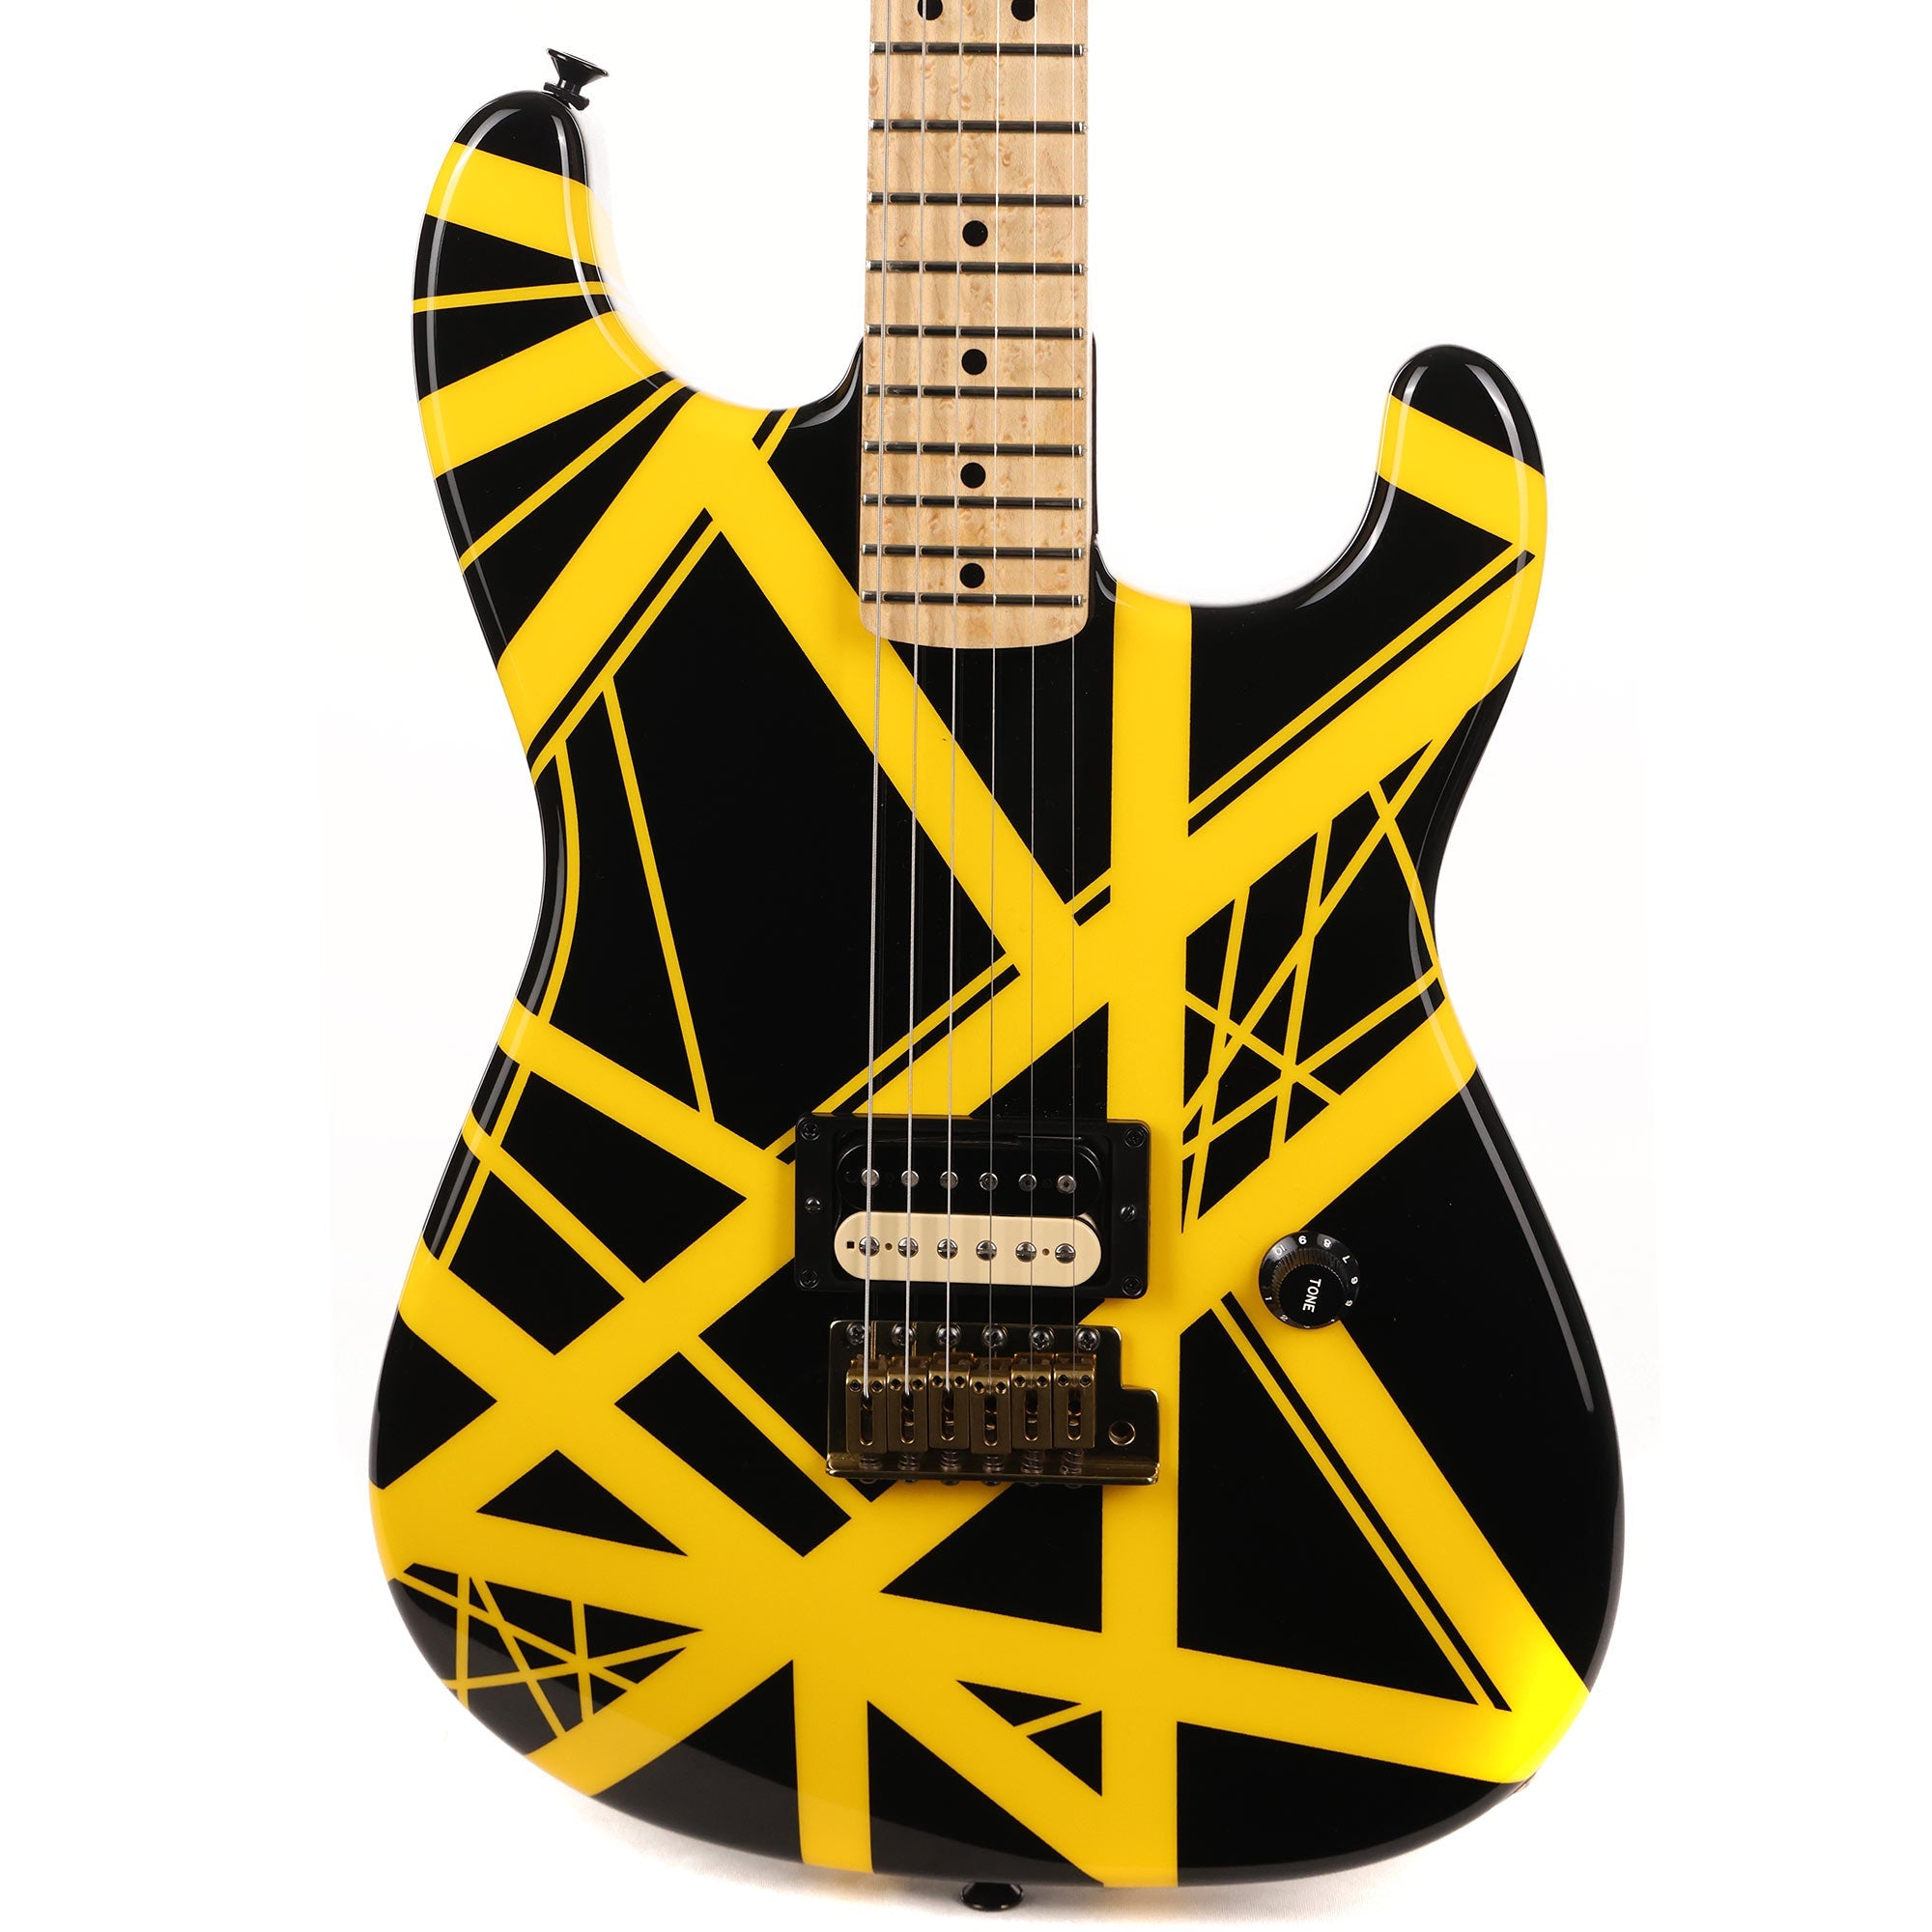 1999 Charvel Black and Yellow Striped Guitar Painted by Dan 